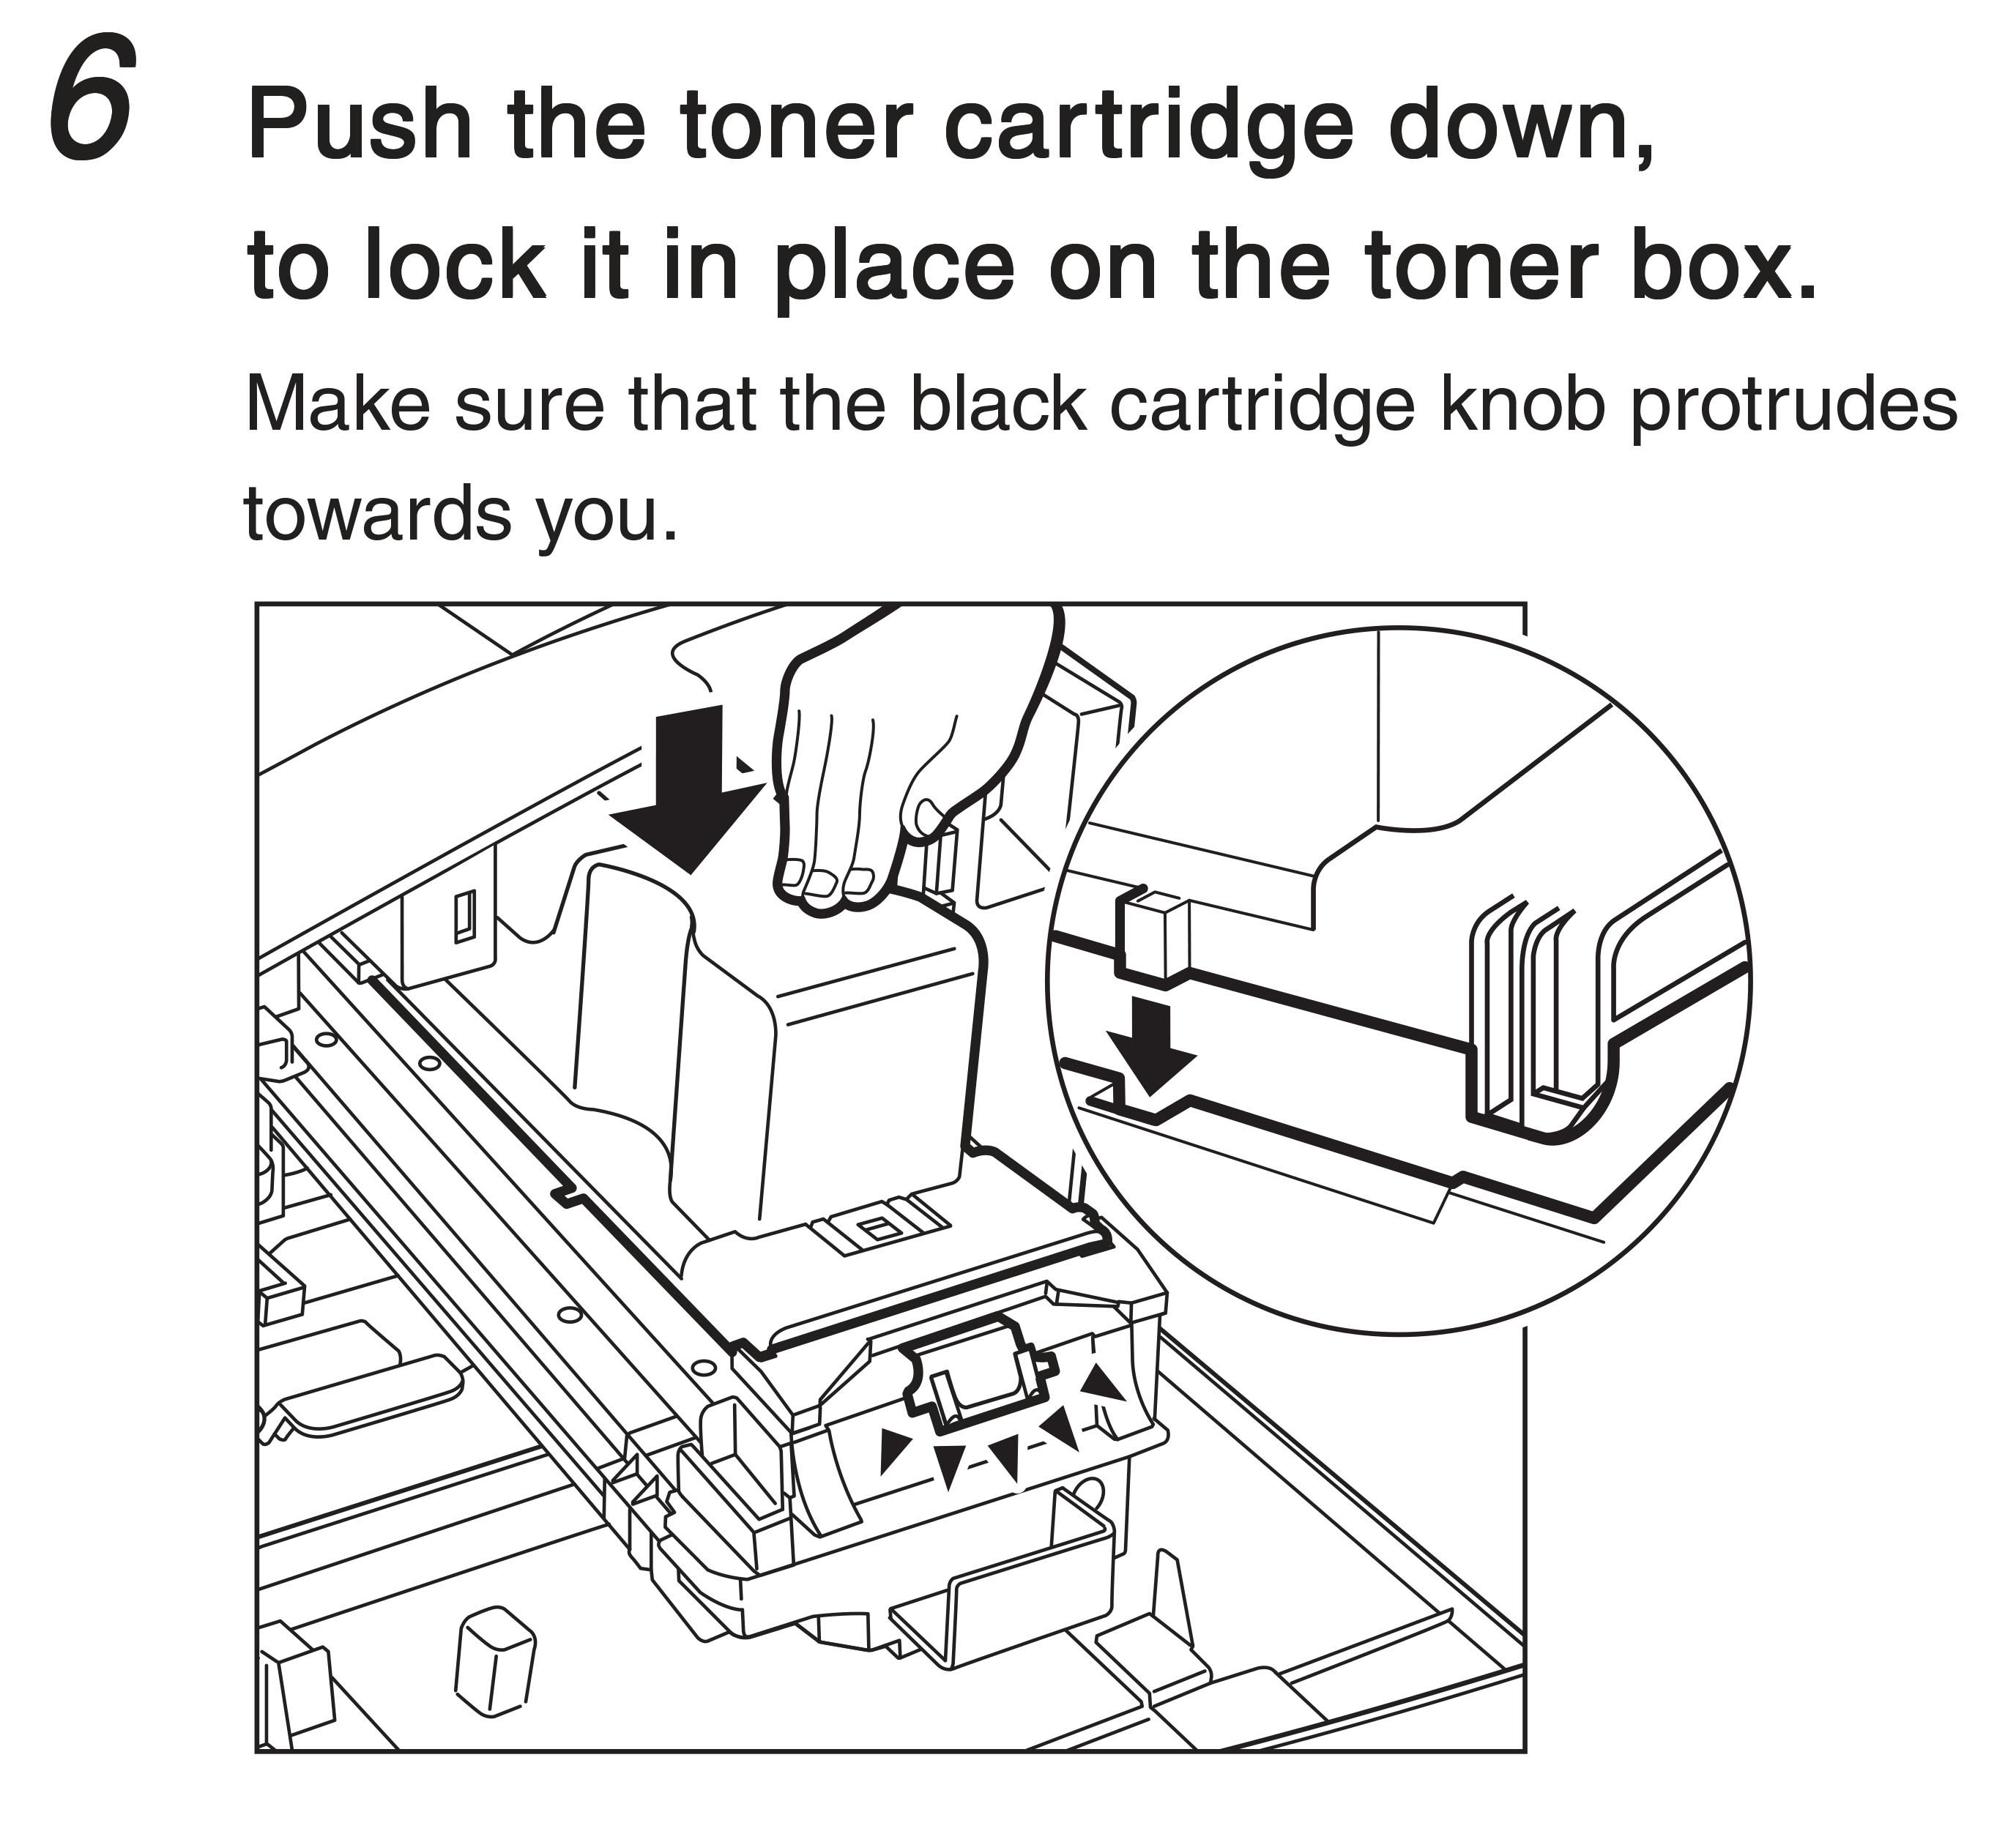 6. Push the toner cartridge down, to lock it in place on the toner box. Make sure that the black cartridge know protrudes towards you.